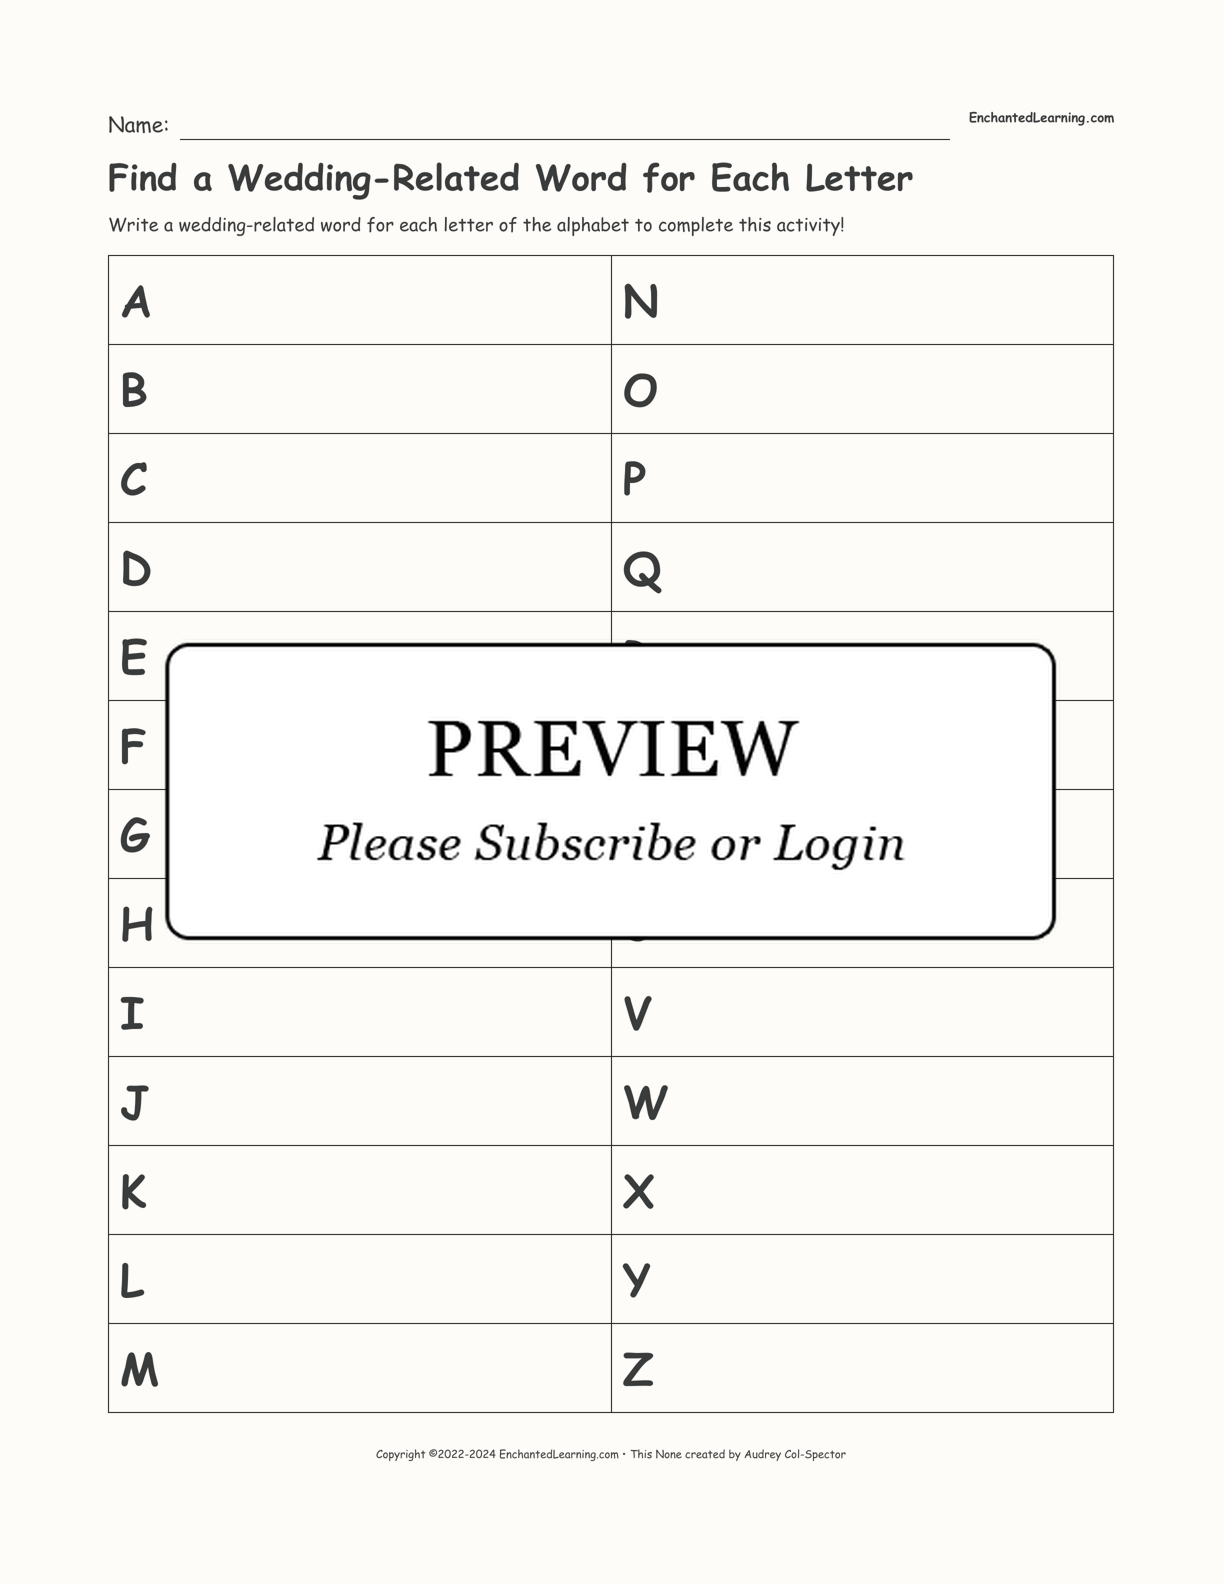 Find a Wedding-Related Word for Each Letter interactive worksheet page 1